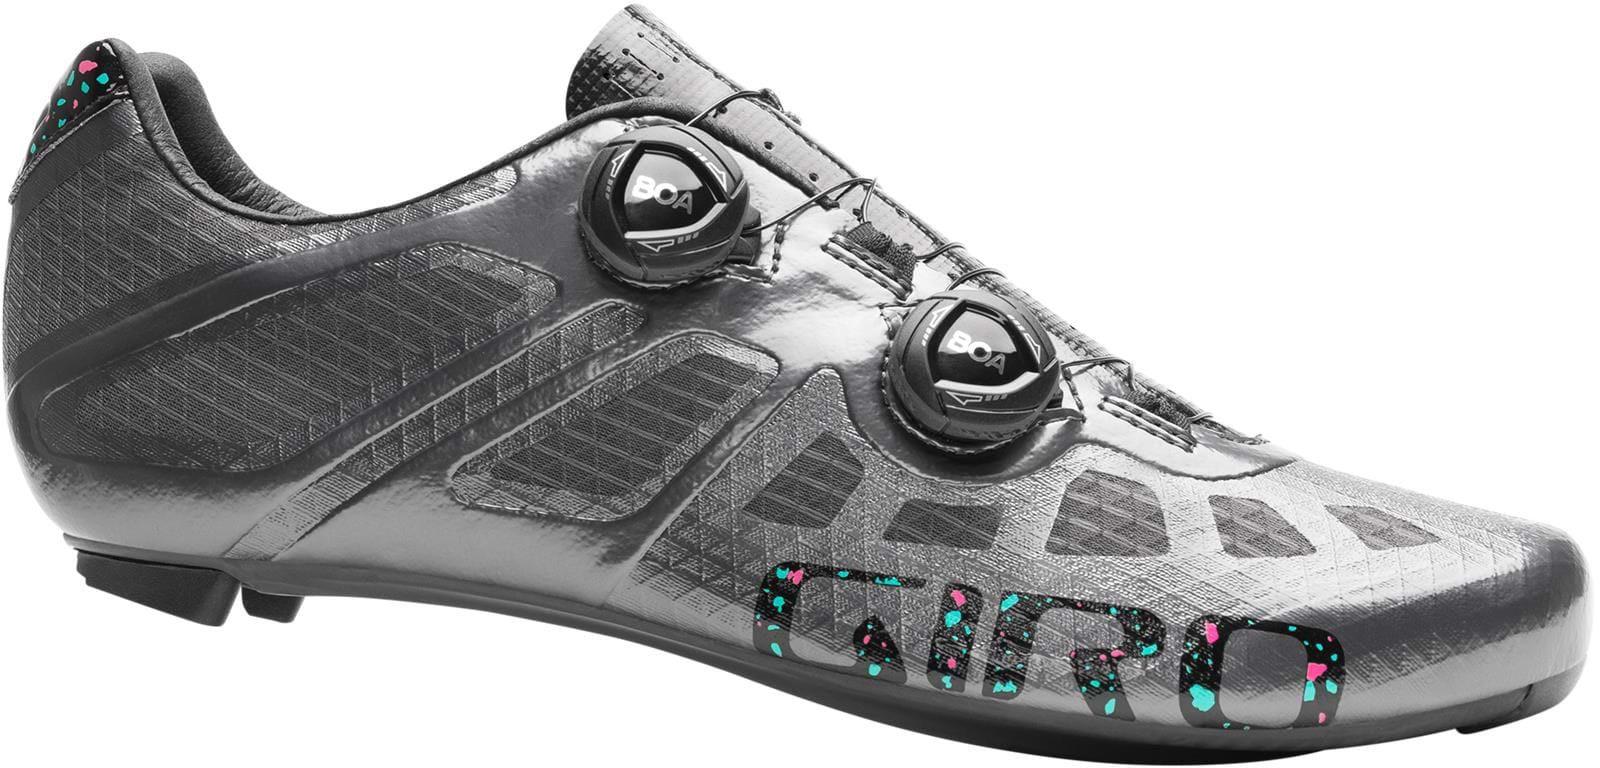 Giro Imperial Road Cycling Shoes - Carbon Mica